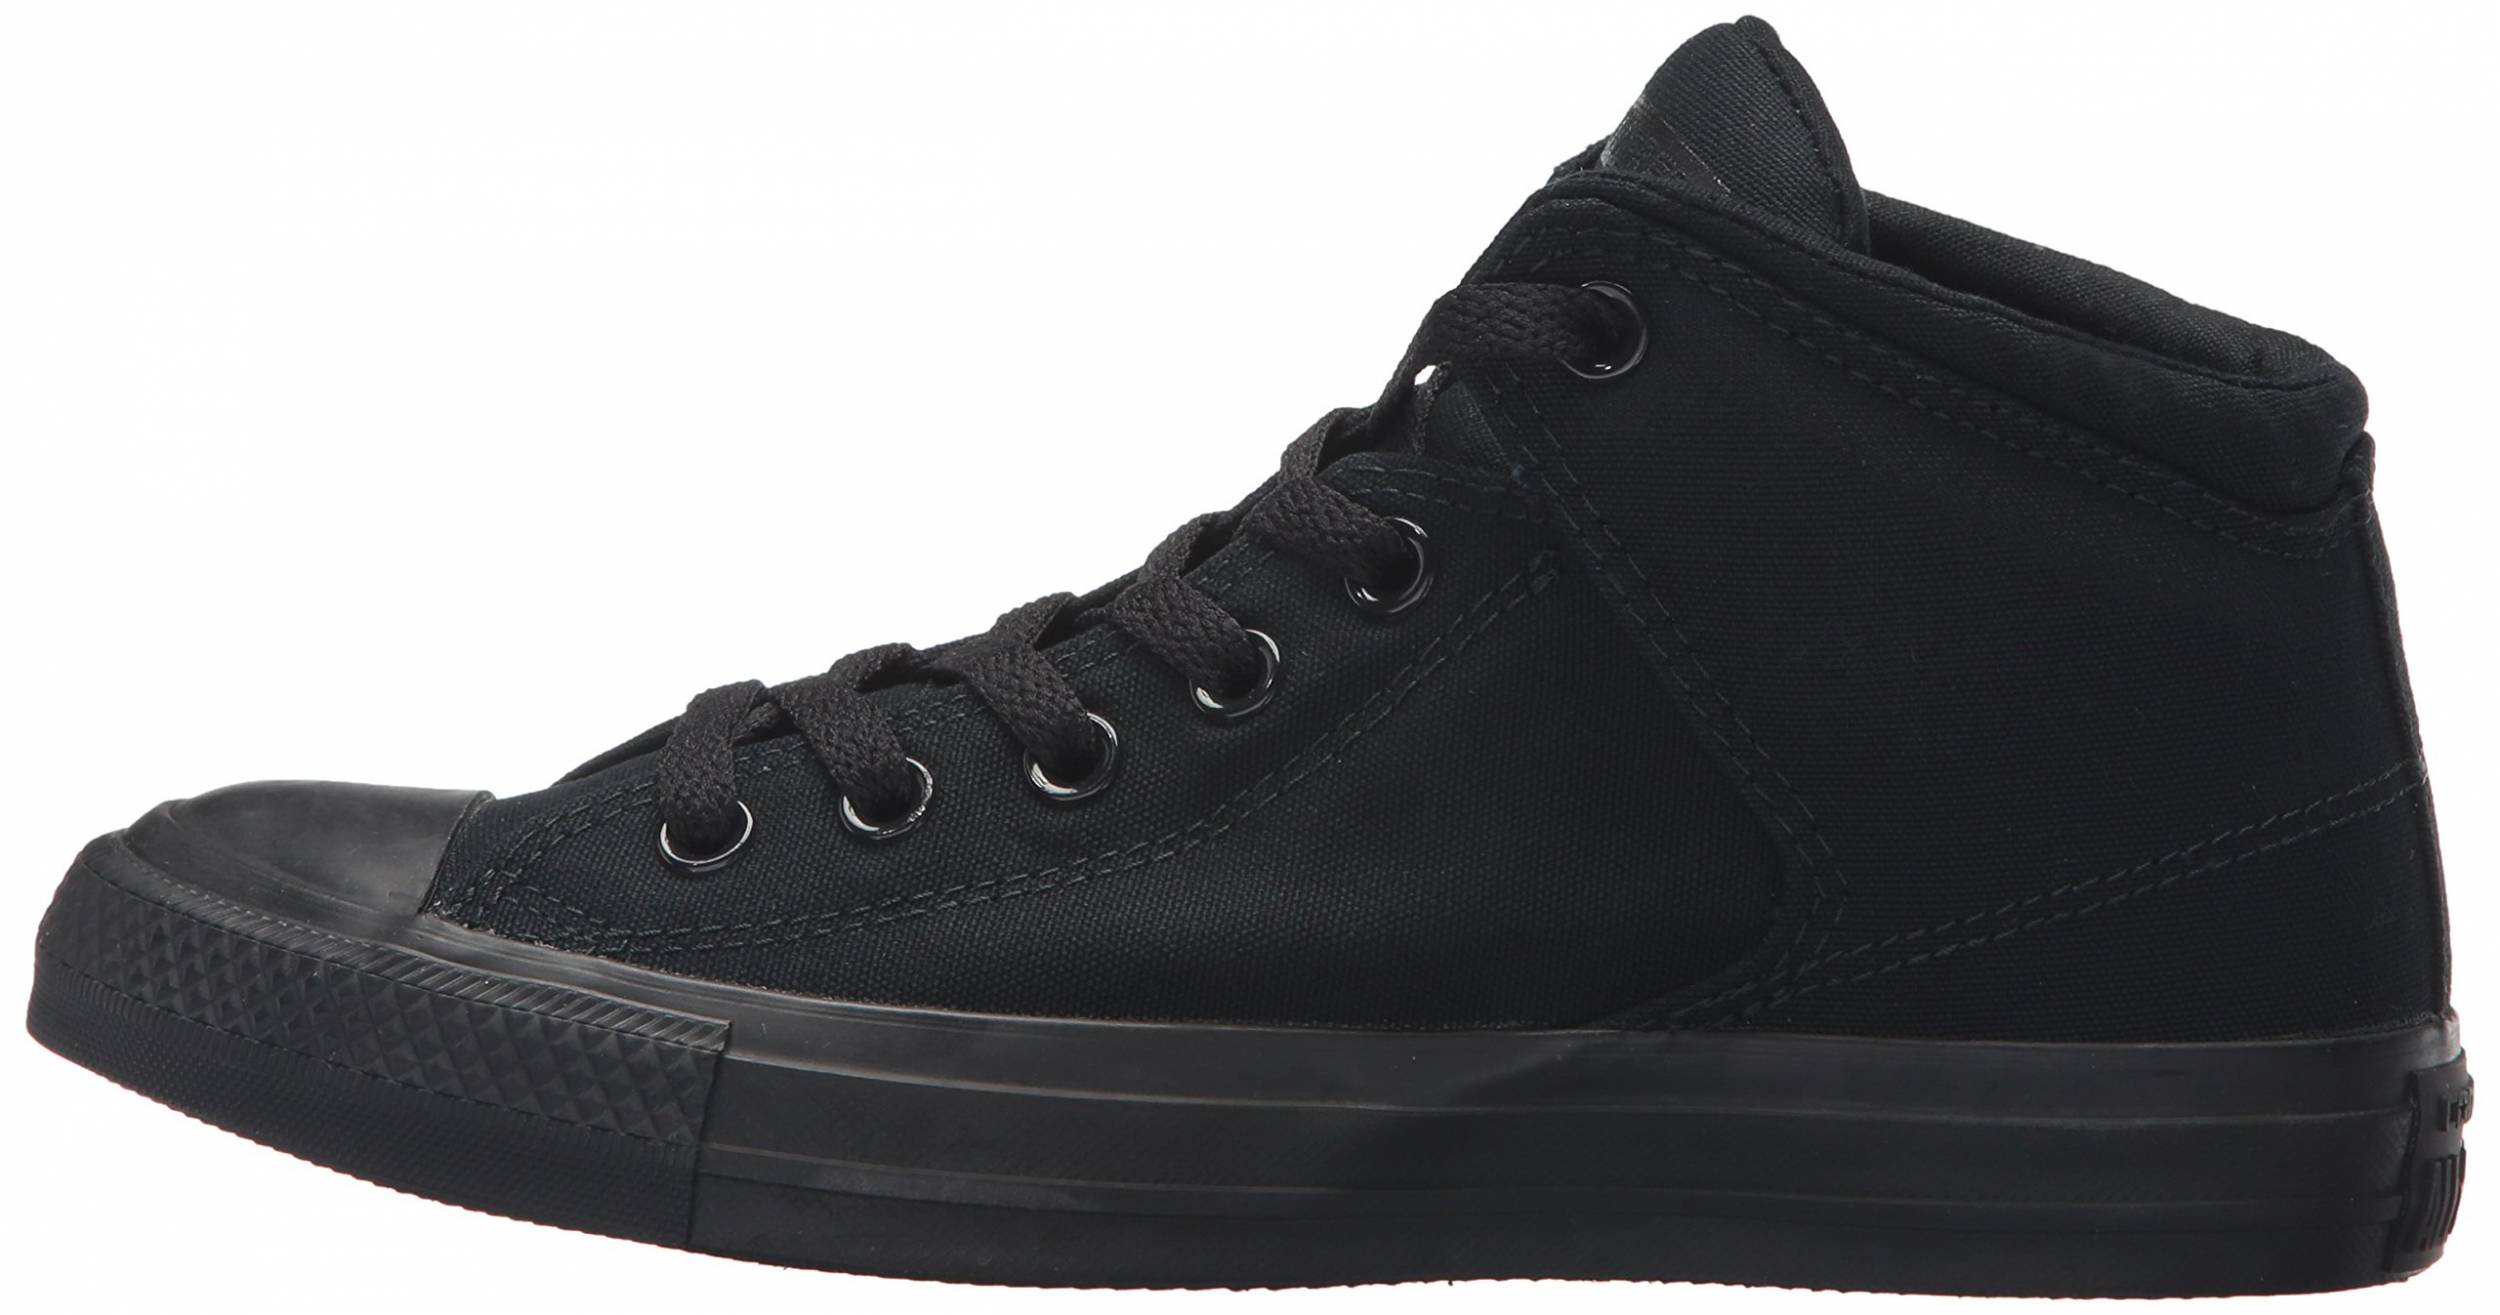 Save 37% on Converse Cheap Sneakers (34 